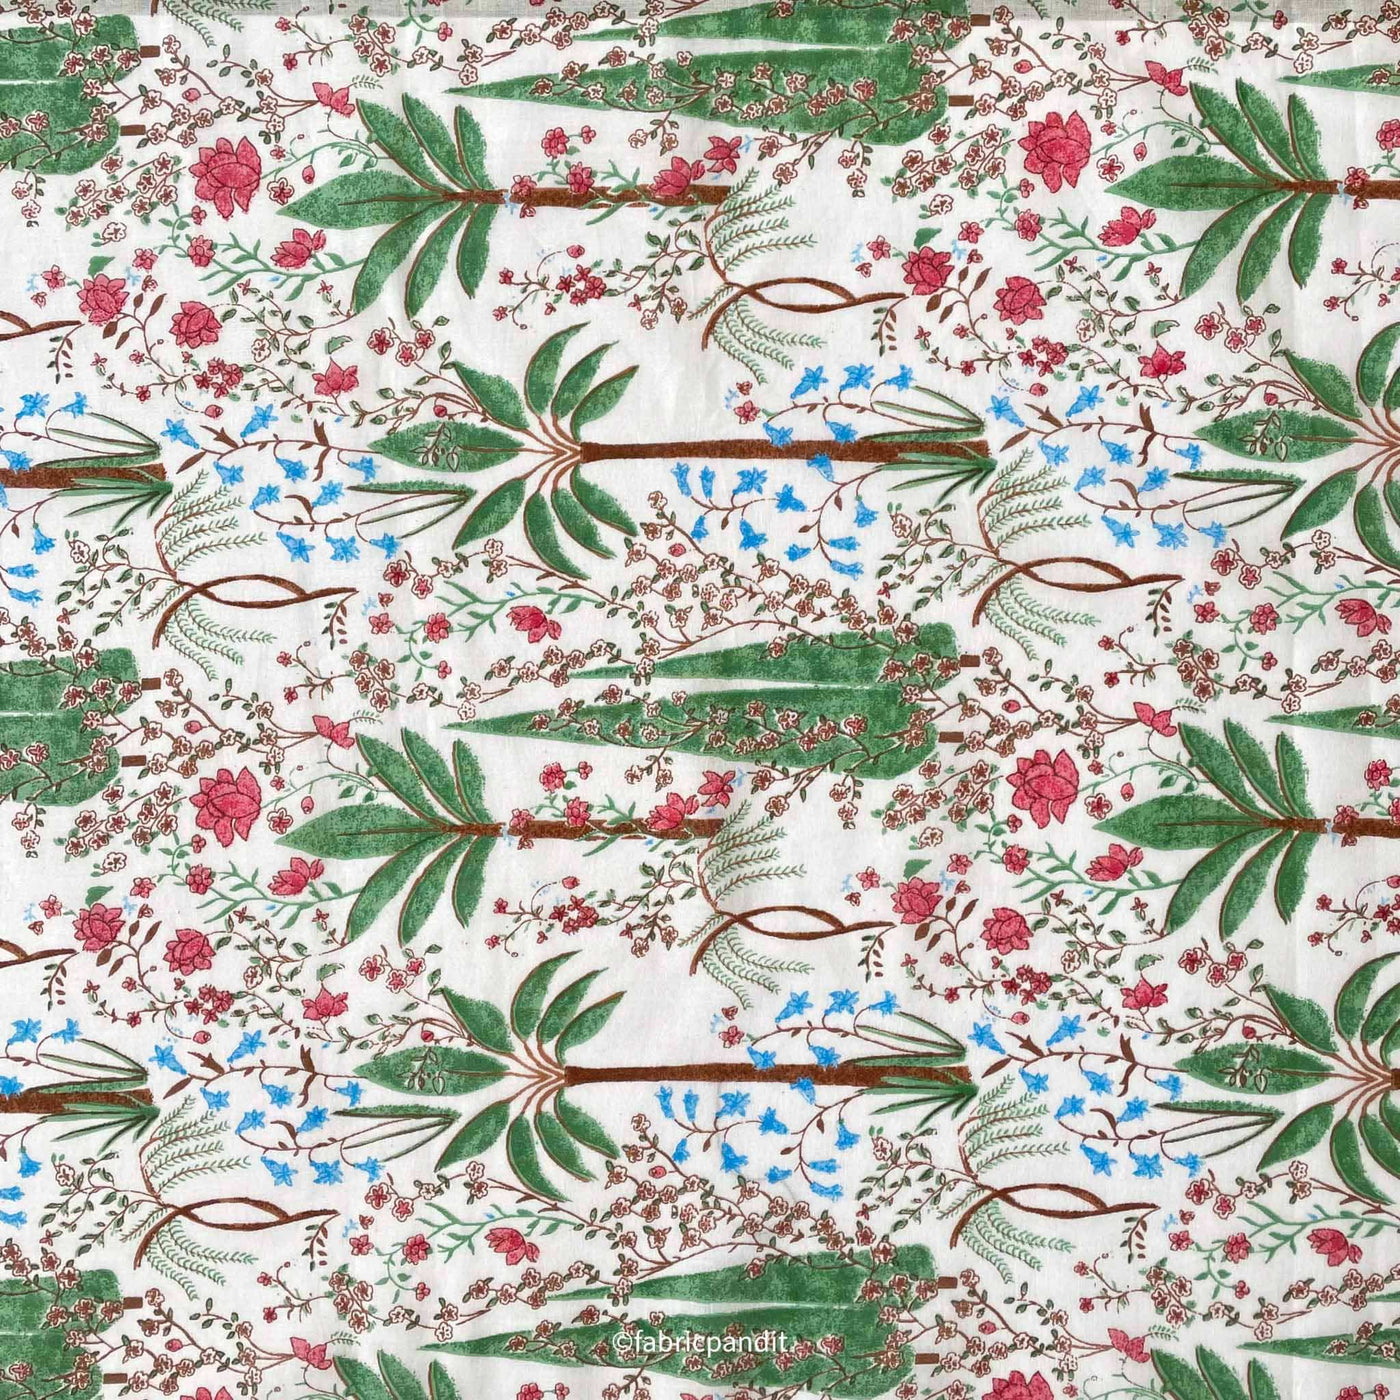 Fabric Pandit Fabric Fresh Green and Pink The Calm of Oasis Hand Block Printed Pure Mul Cotton Fabric